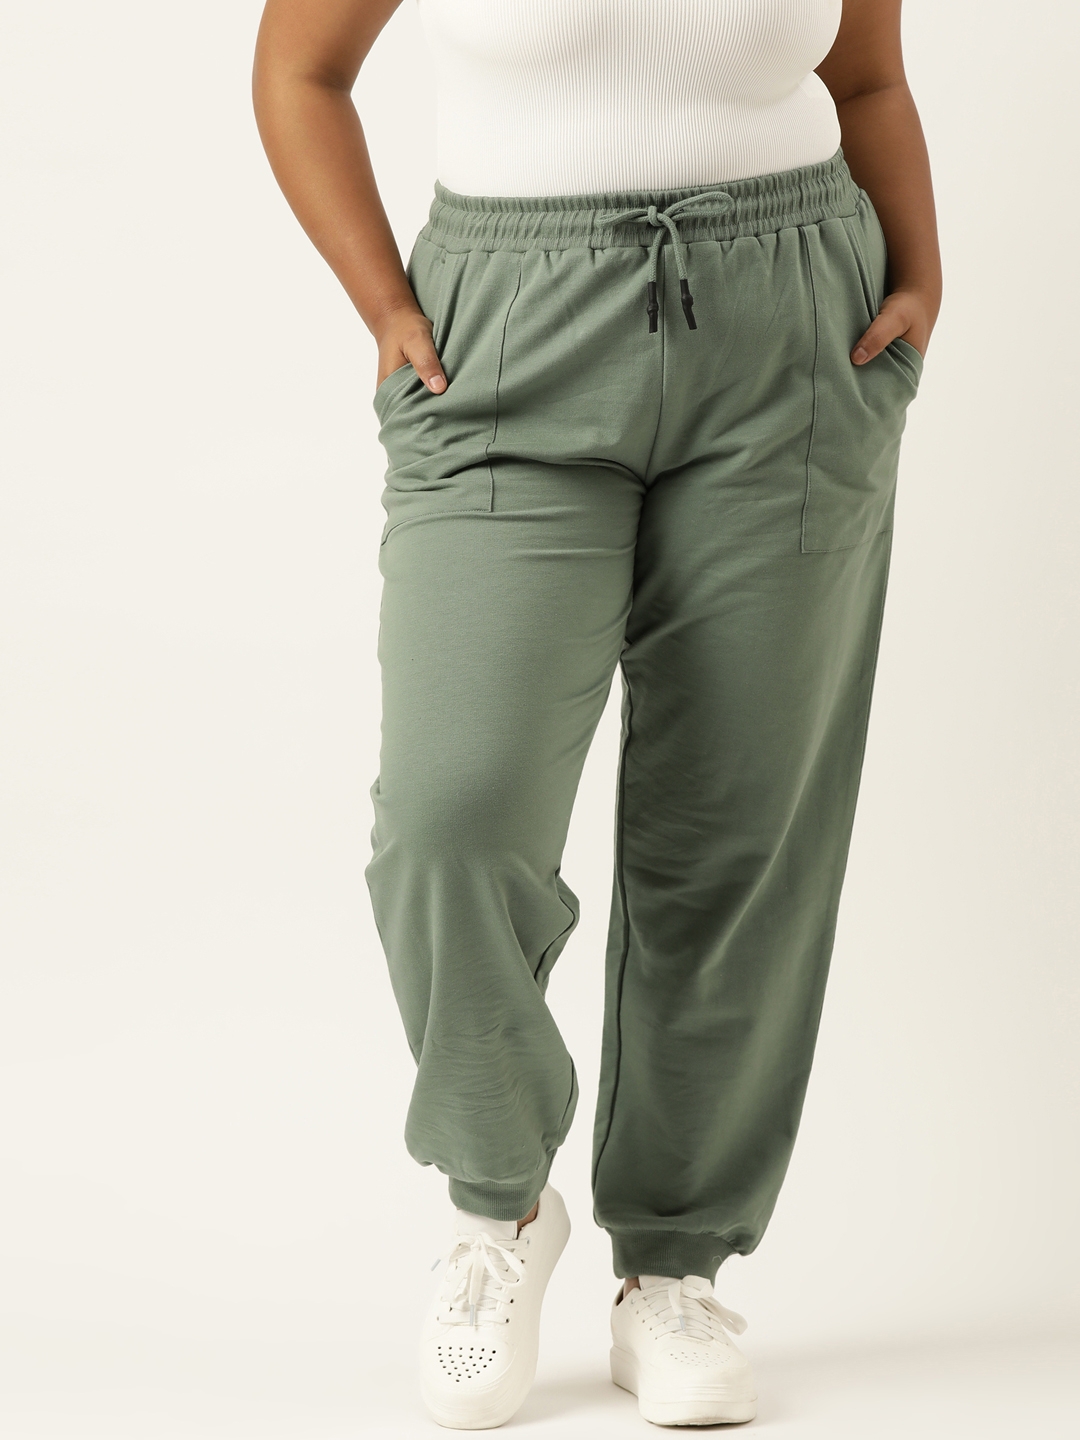 Plus Size Green Cotton Jogger With Cuff For Women